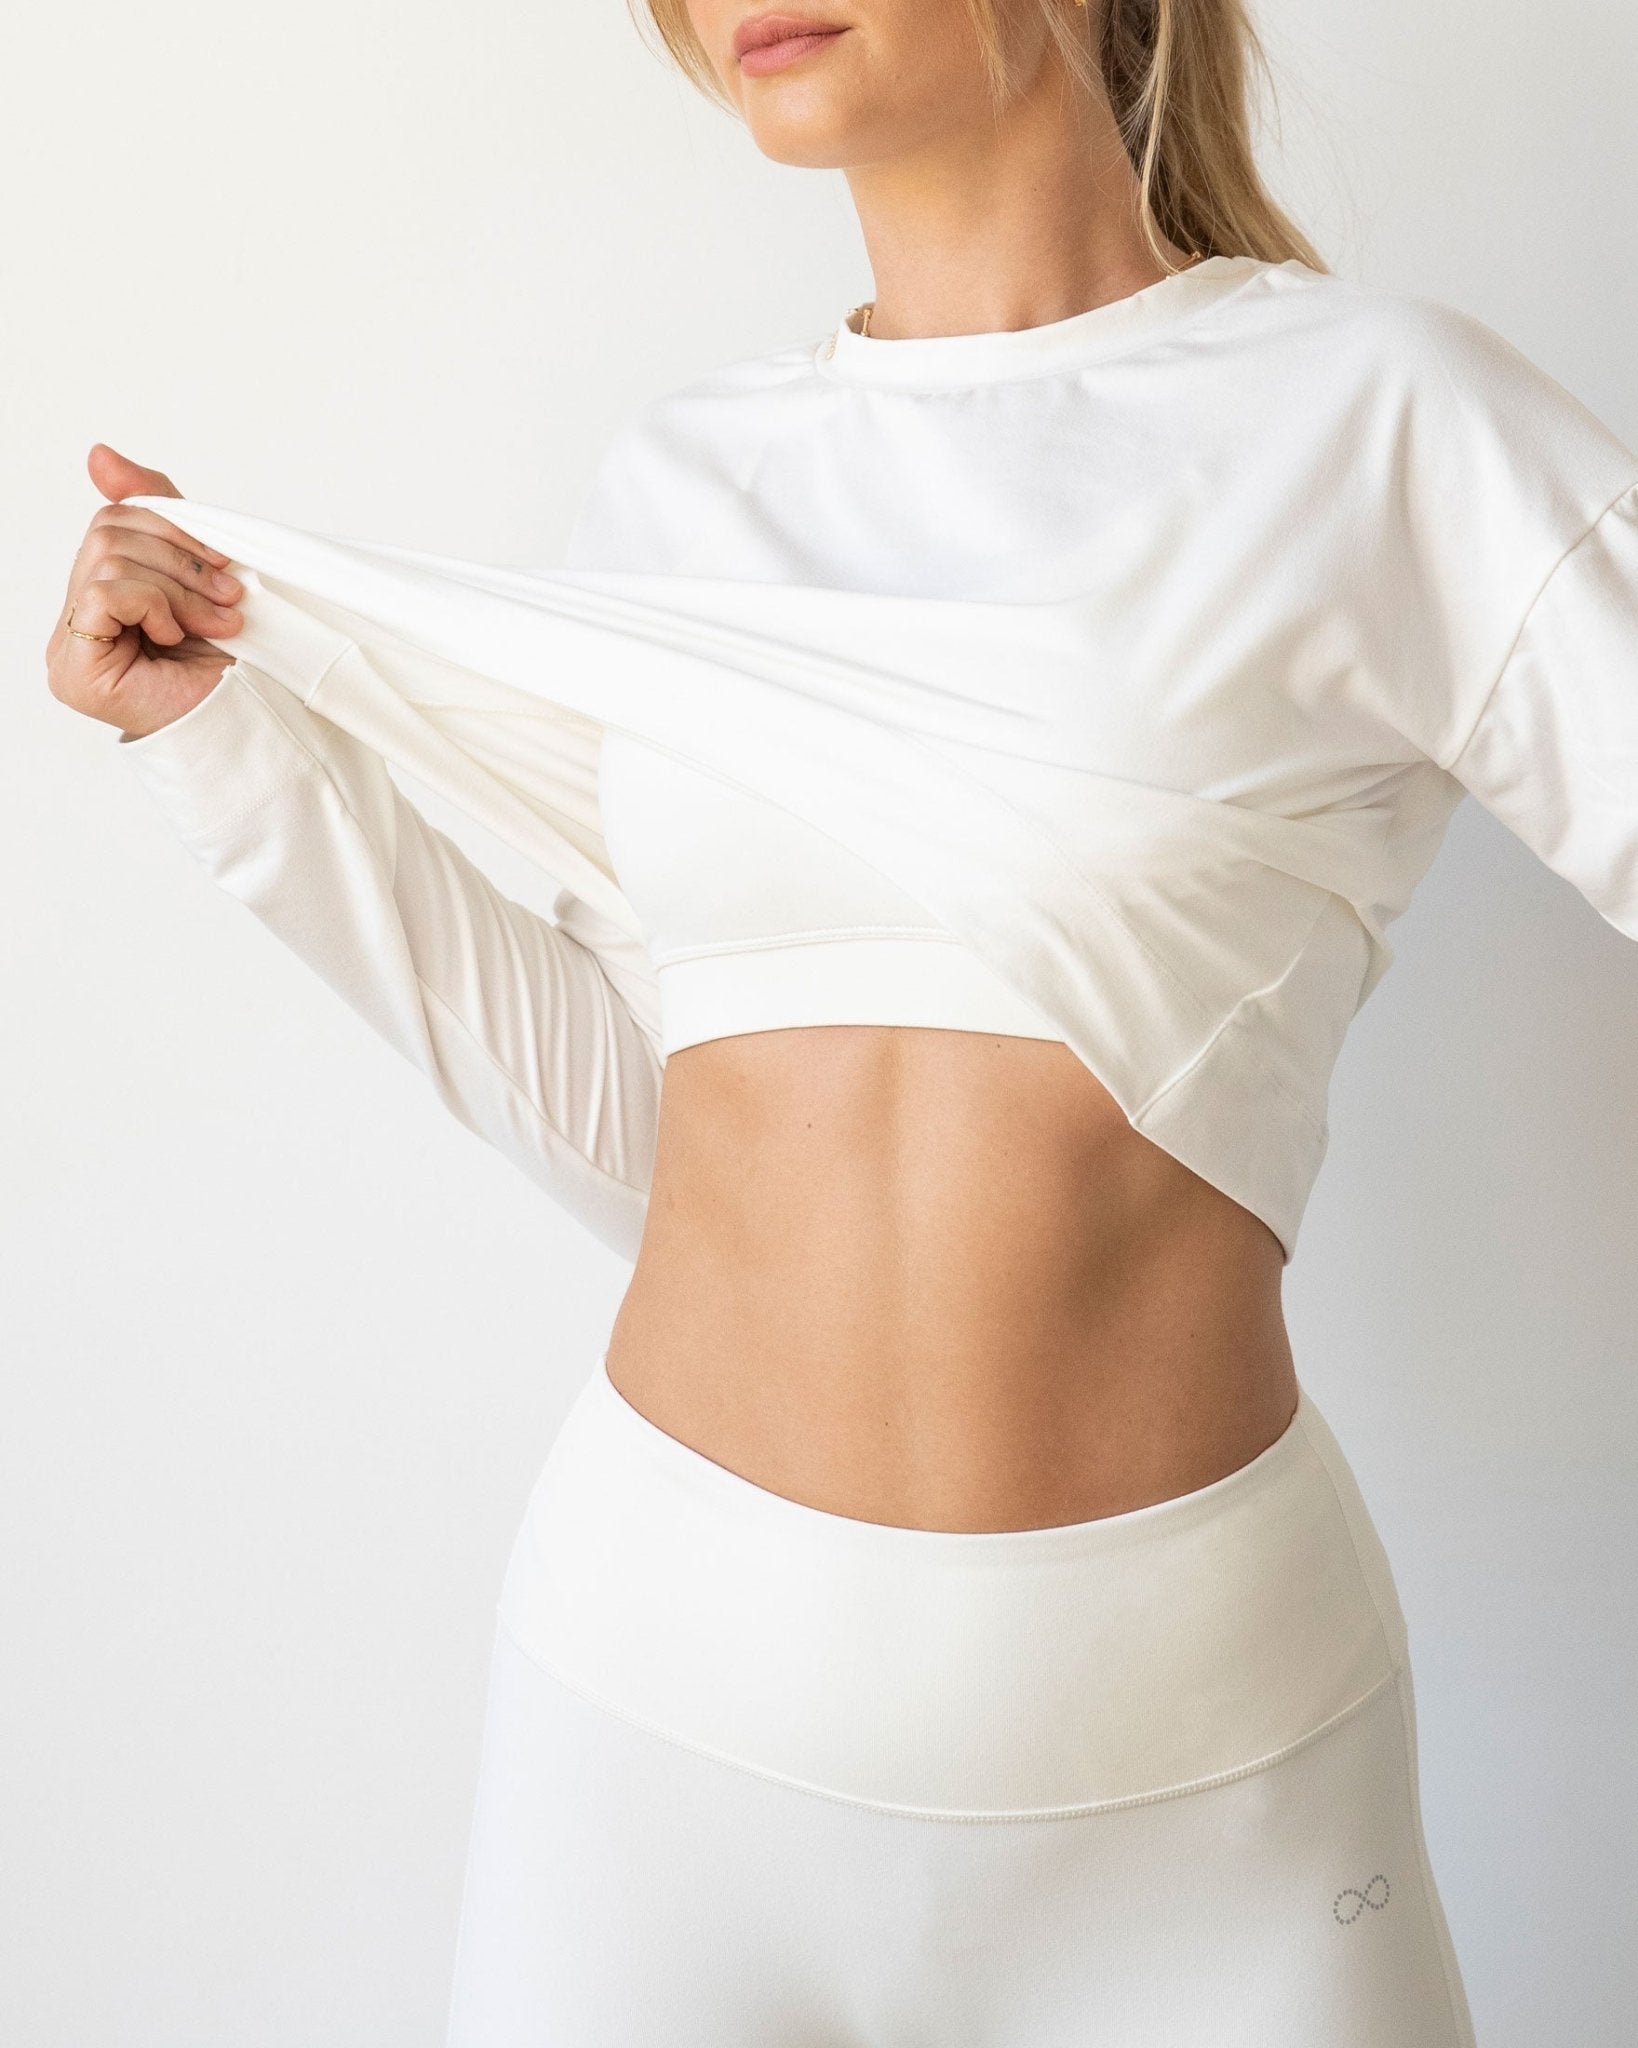 Go With The Flow Crop Long Sleeve - Guy Christopher